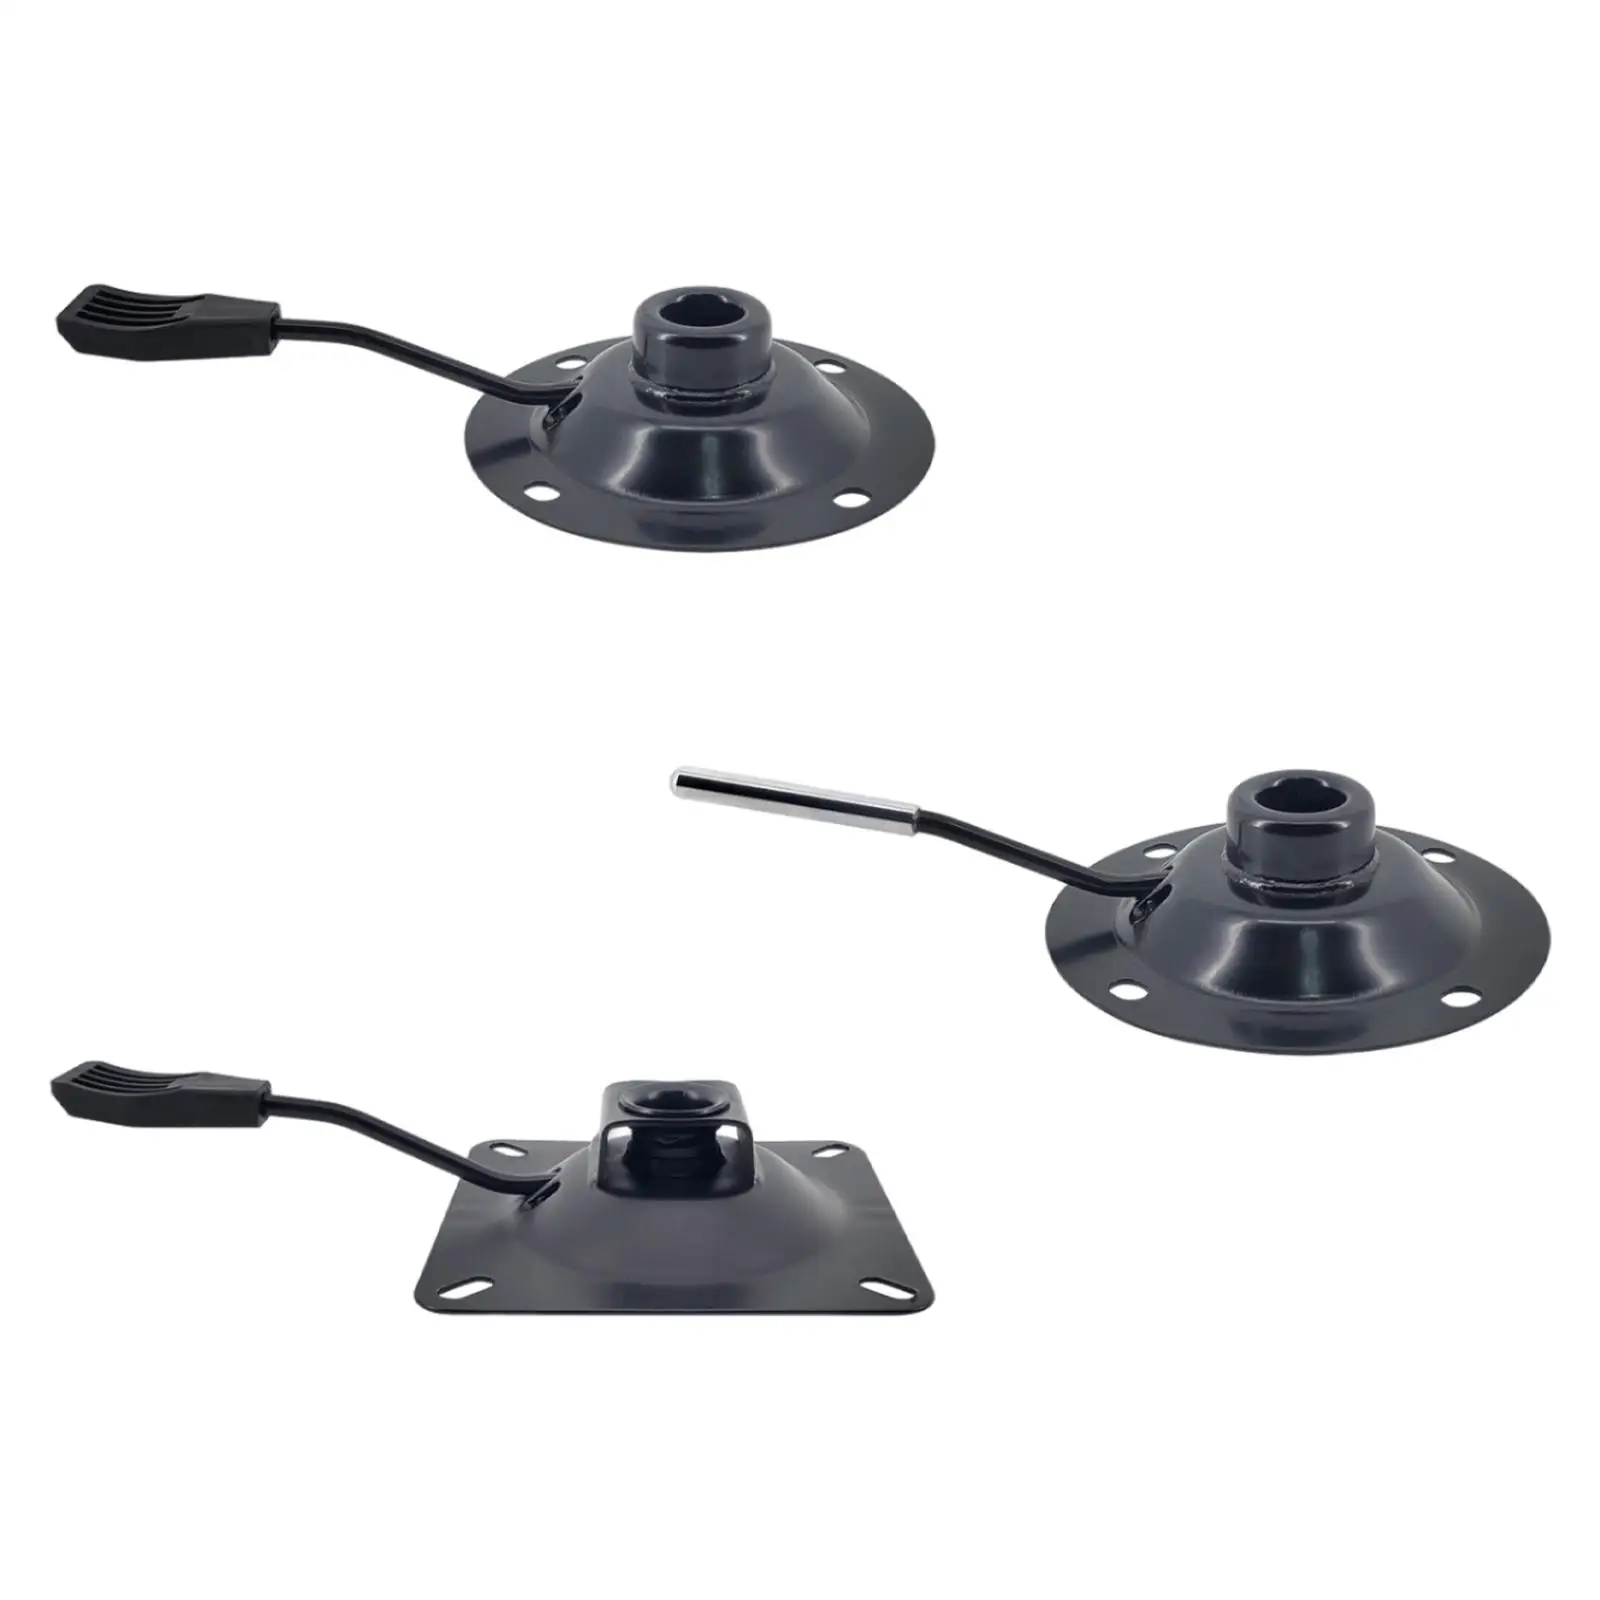 Office Chair Tilt Swivel Plate Swivel Base Plate Control Seat Mechanism Replacement Durable Office Chair Tilt Base for Chair